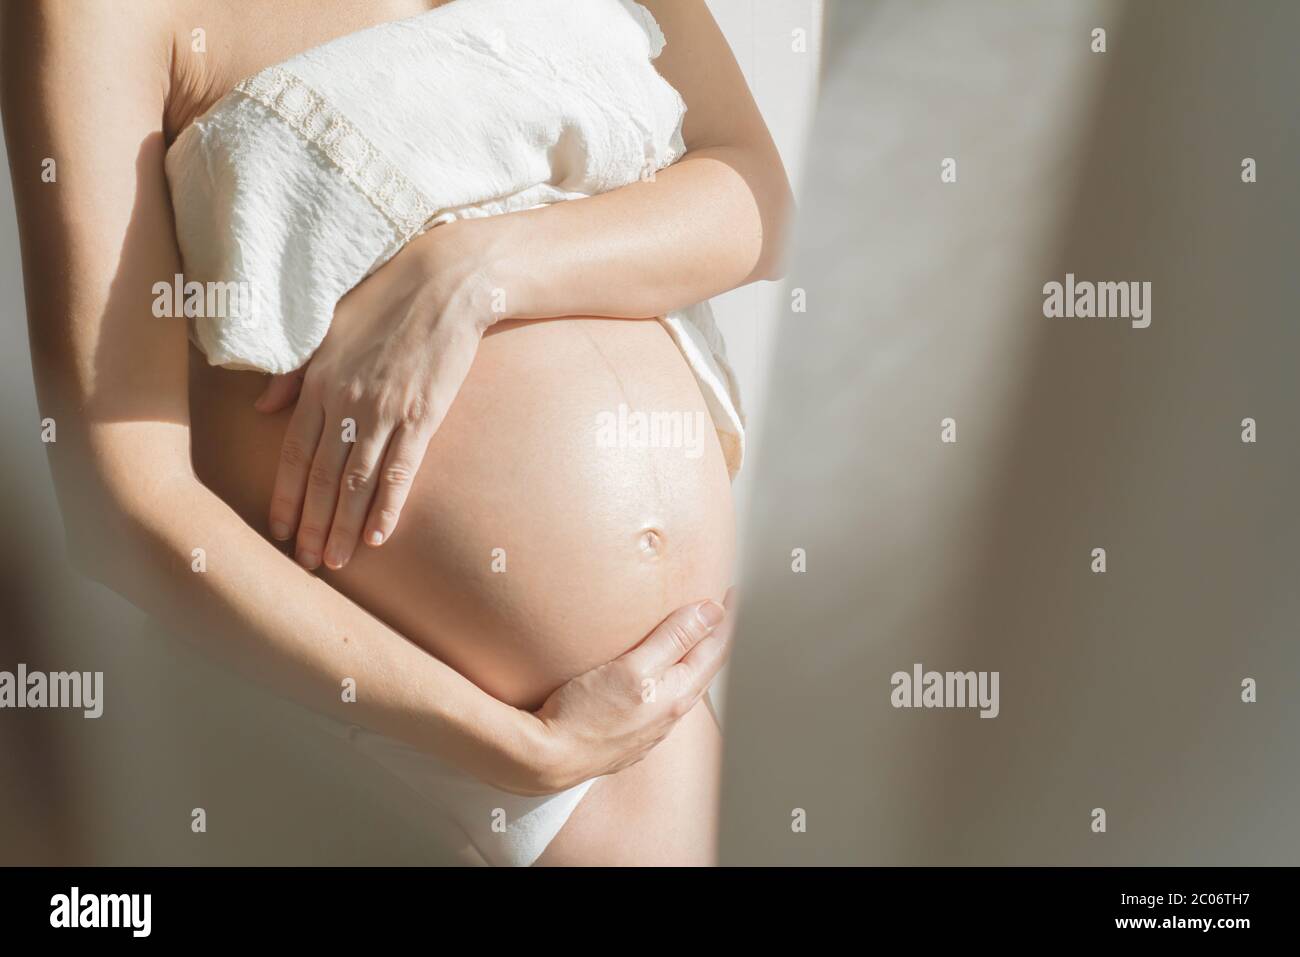 warm gentle hands caress beautiful pregnant belly, concept, artistic bed sheets and white fabric caress woman intimacy Stock Photo